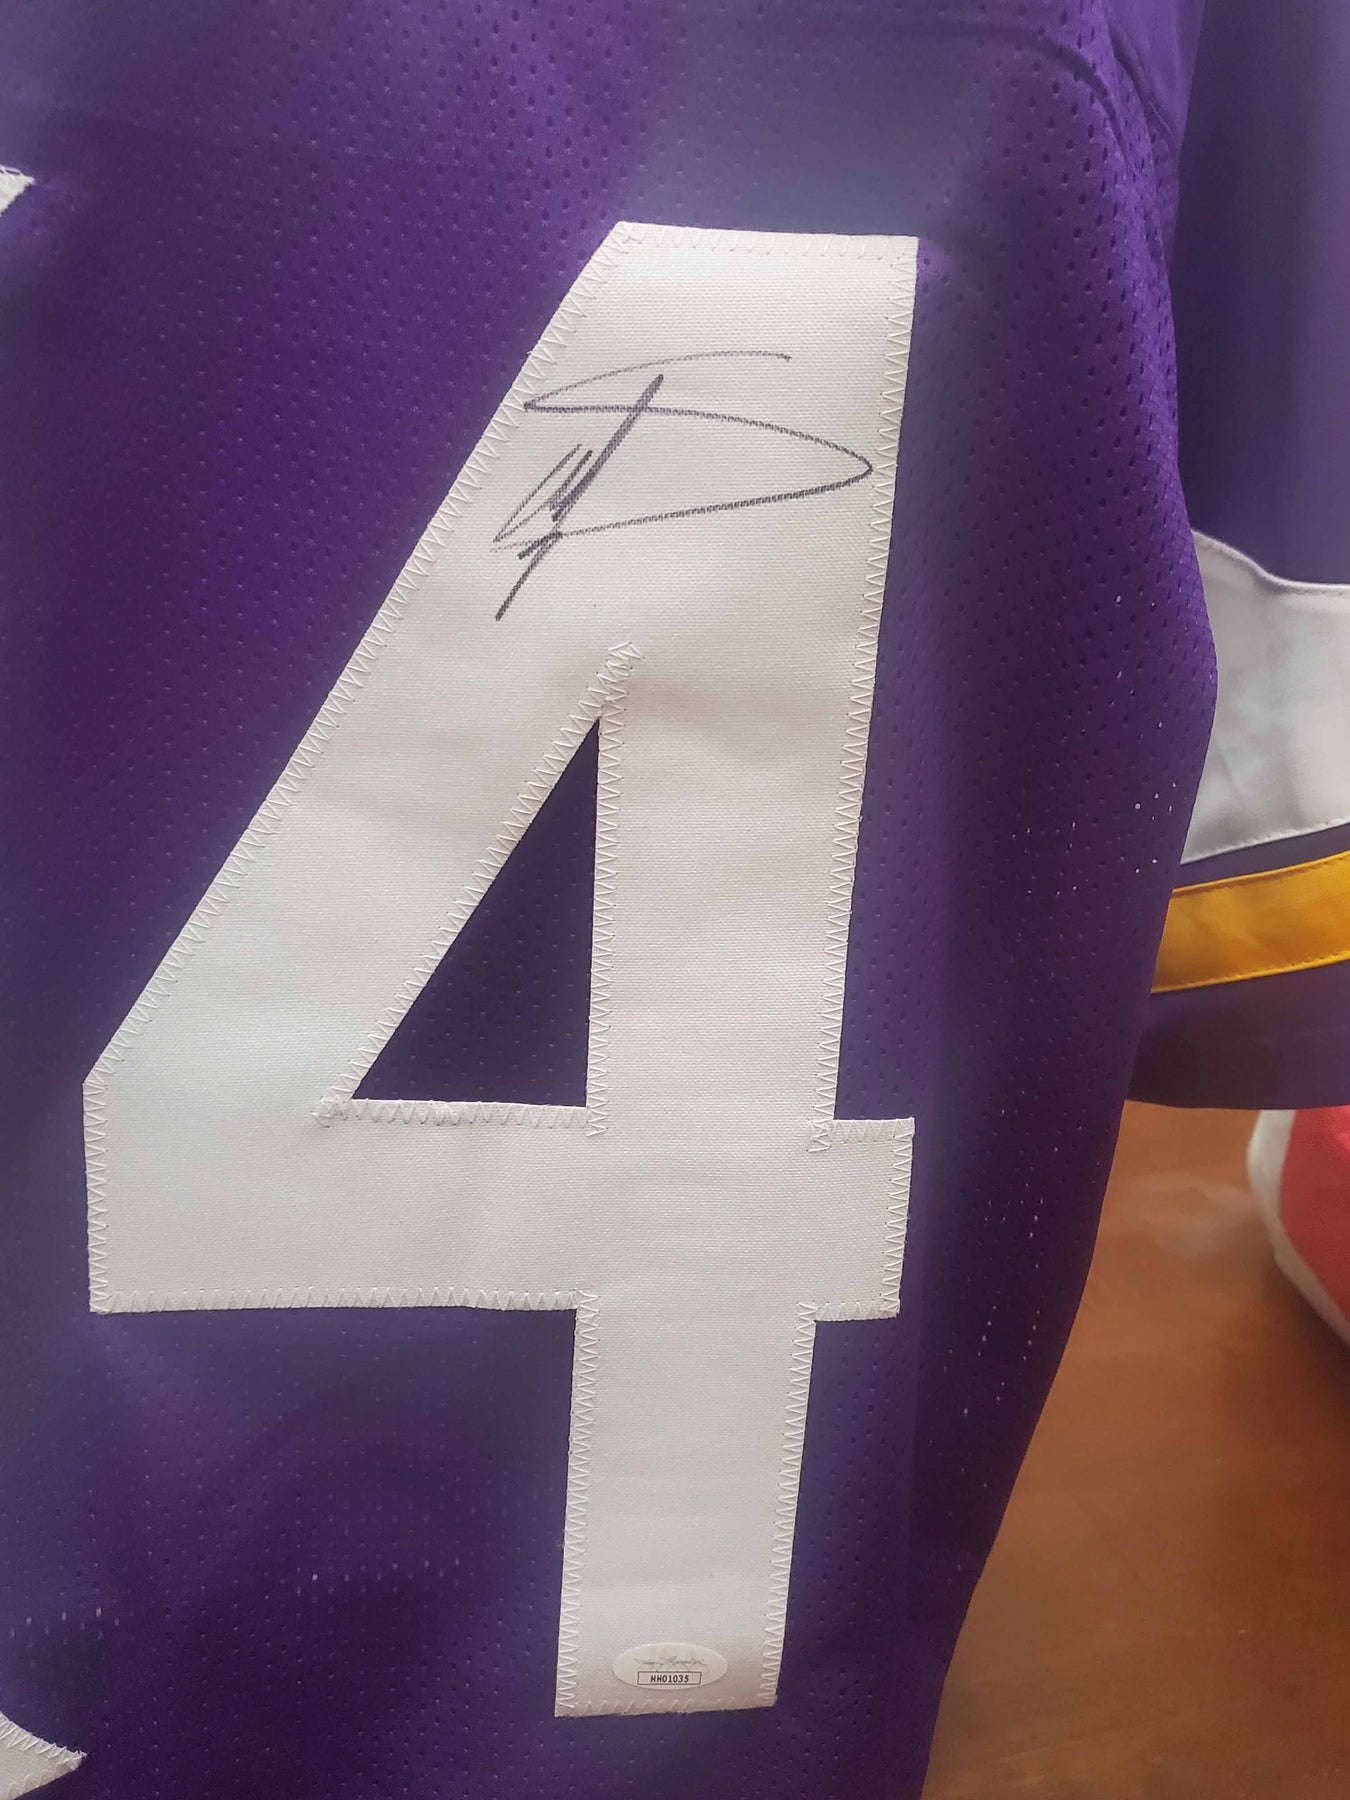 stefon diggs autographed jersey